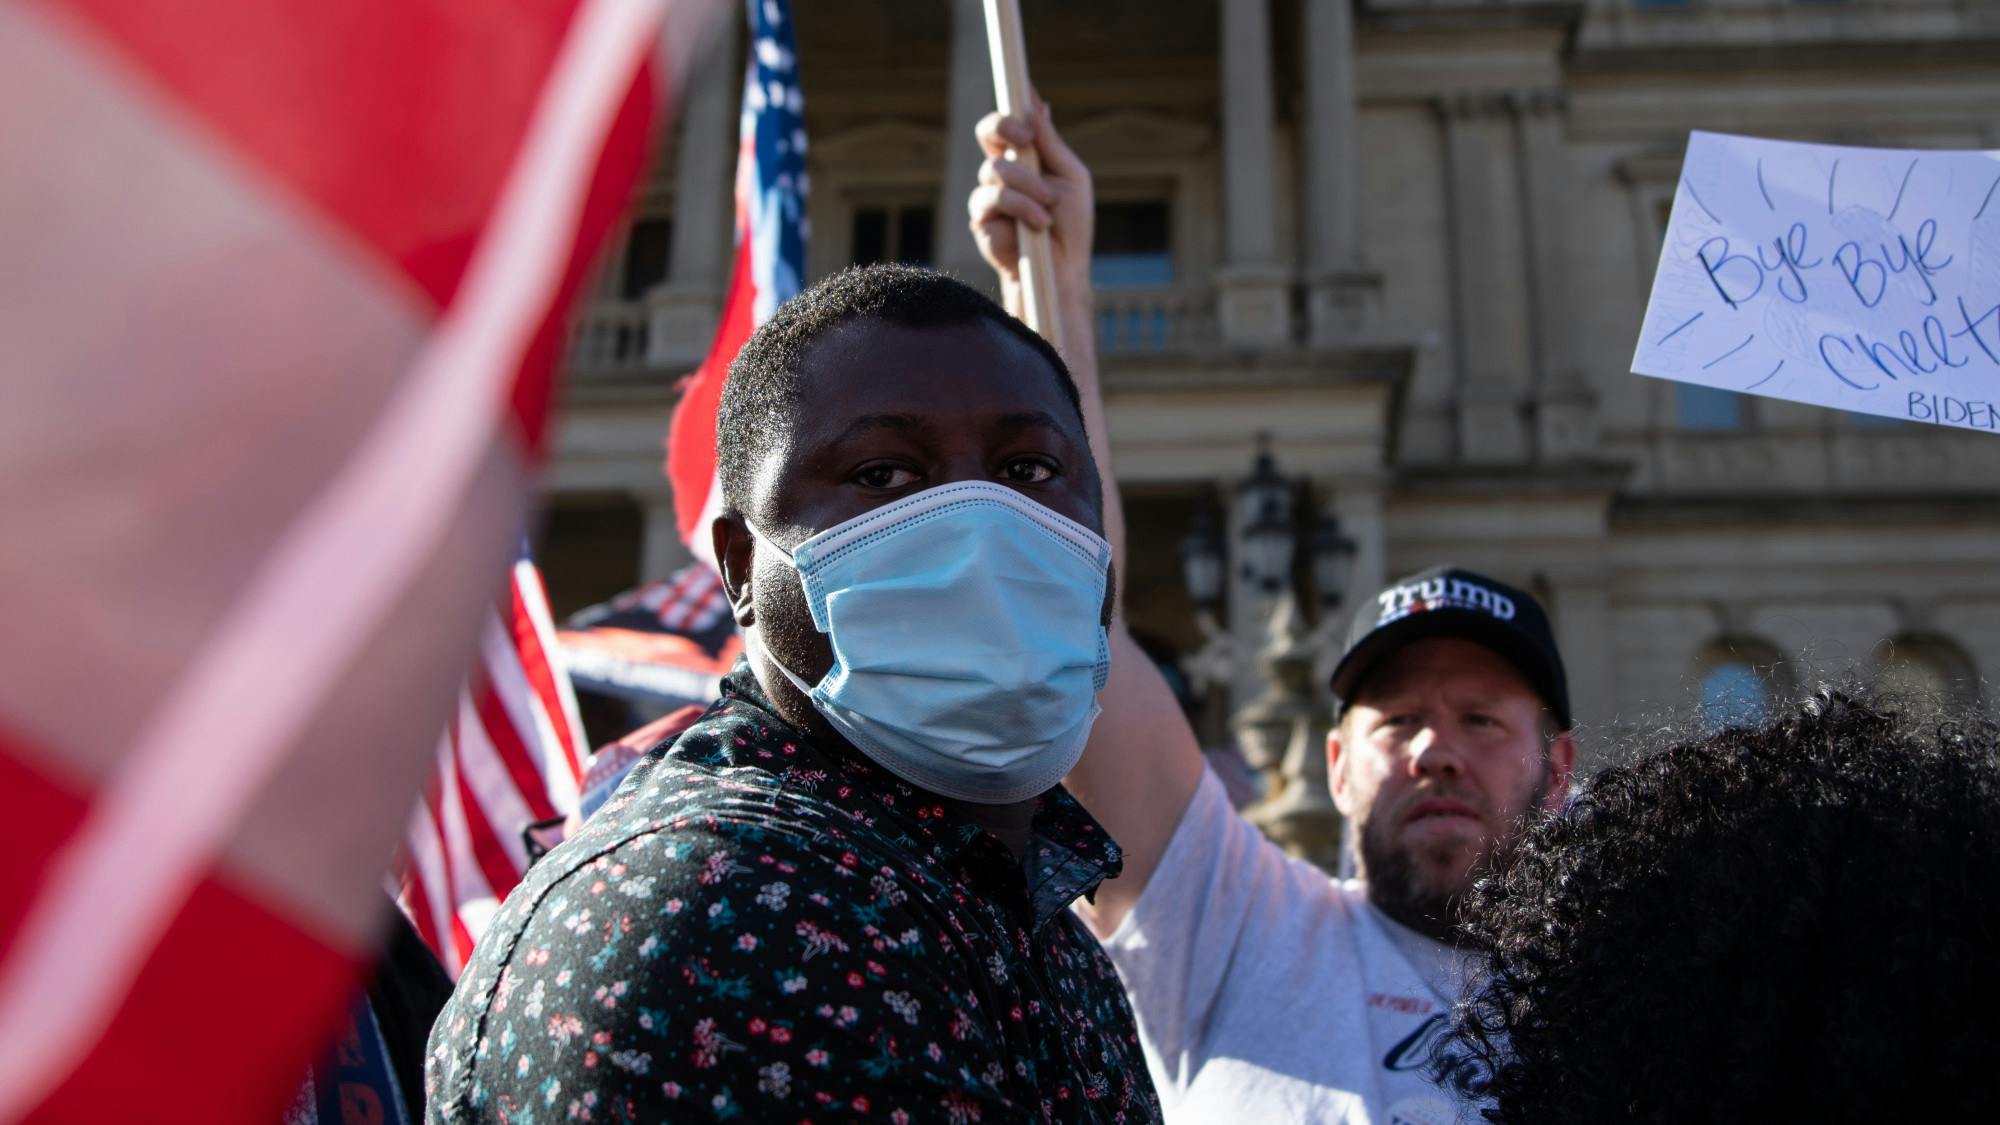 A person wearing a face mask stands in the foreground while a person wearing a Trump hat stands in the background.